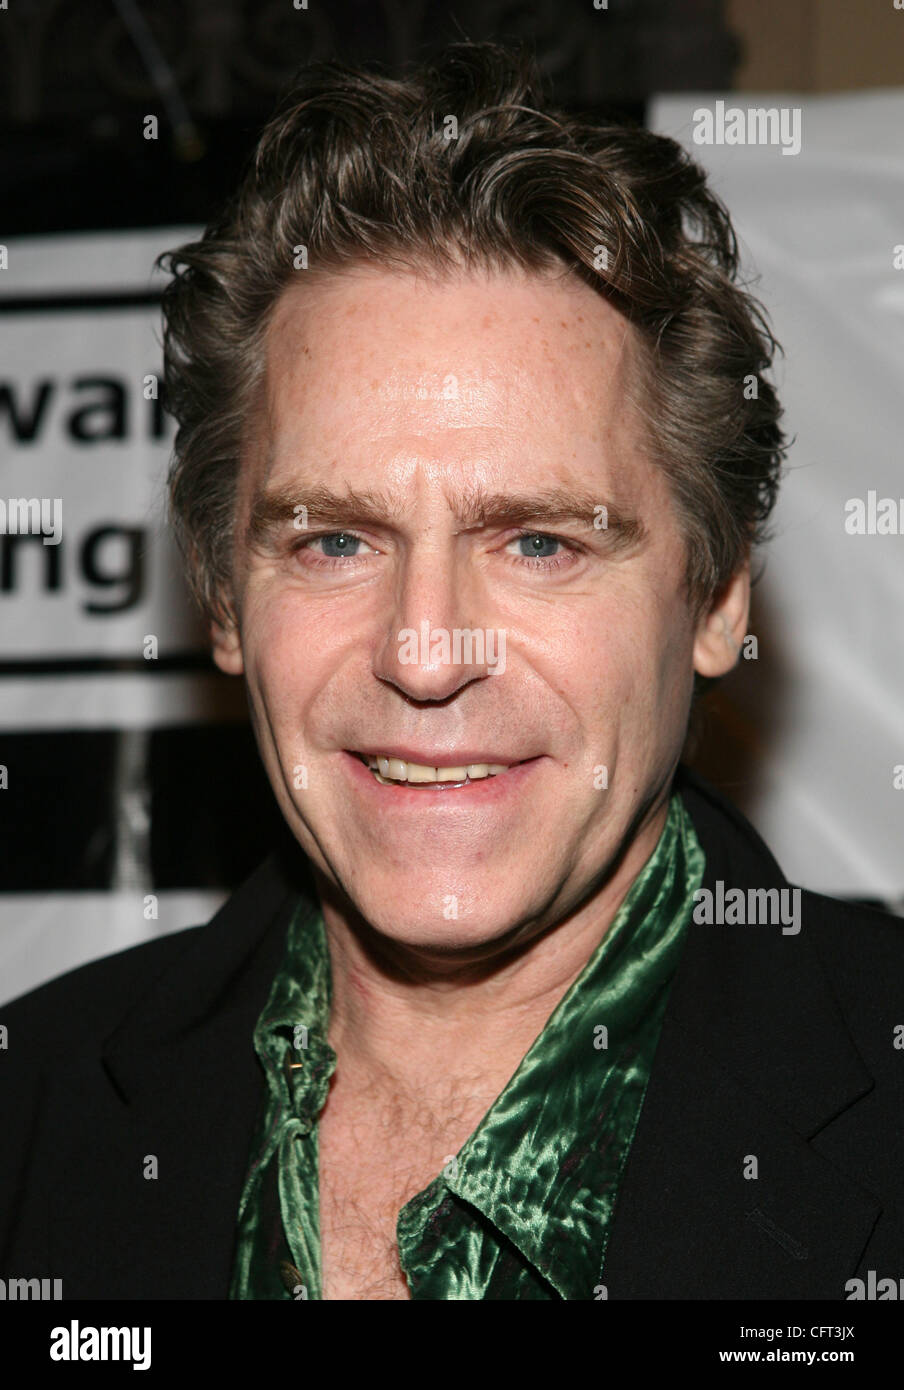 Dec 07, 2006; Hollywood, CA, USA; Actor JEFF CONAWAY arrives at the Howard Fine holiday party benefiting project Angel food. Mandatory Credit: Photo by Marianna Day Massey/ZUMA Press. (©) Copyright 2006 by Marianna Day Massey Stock Photo